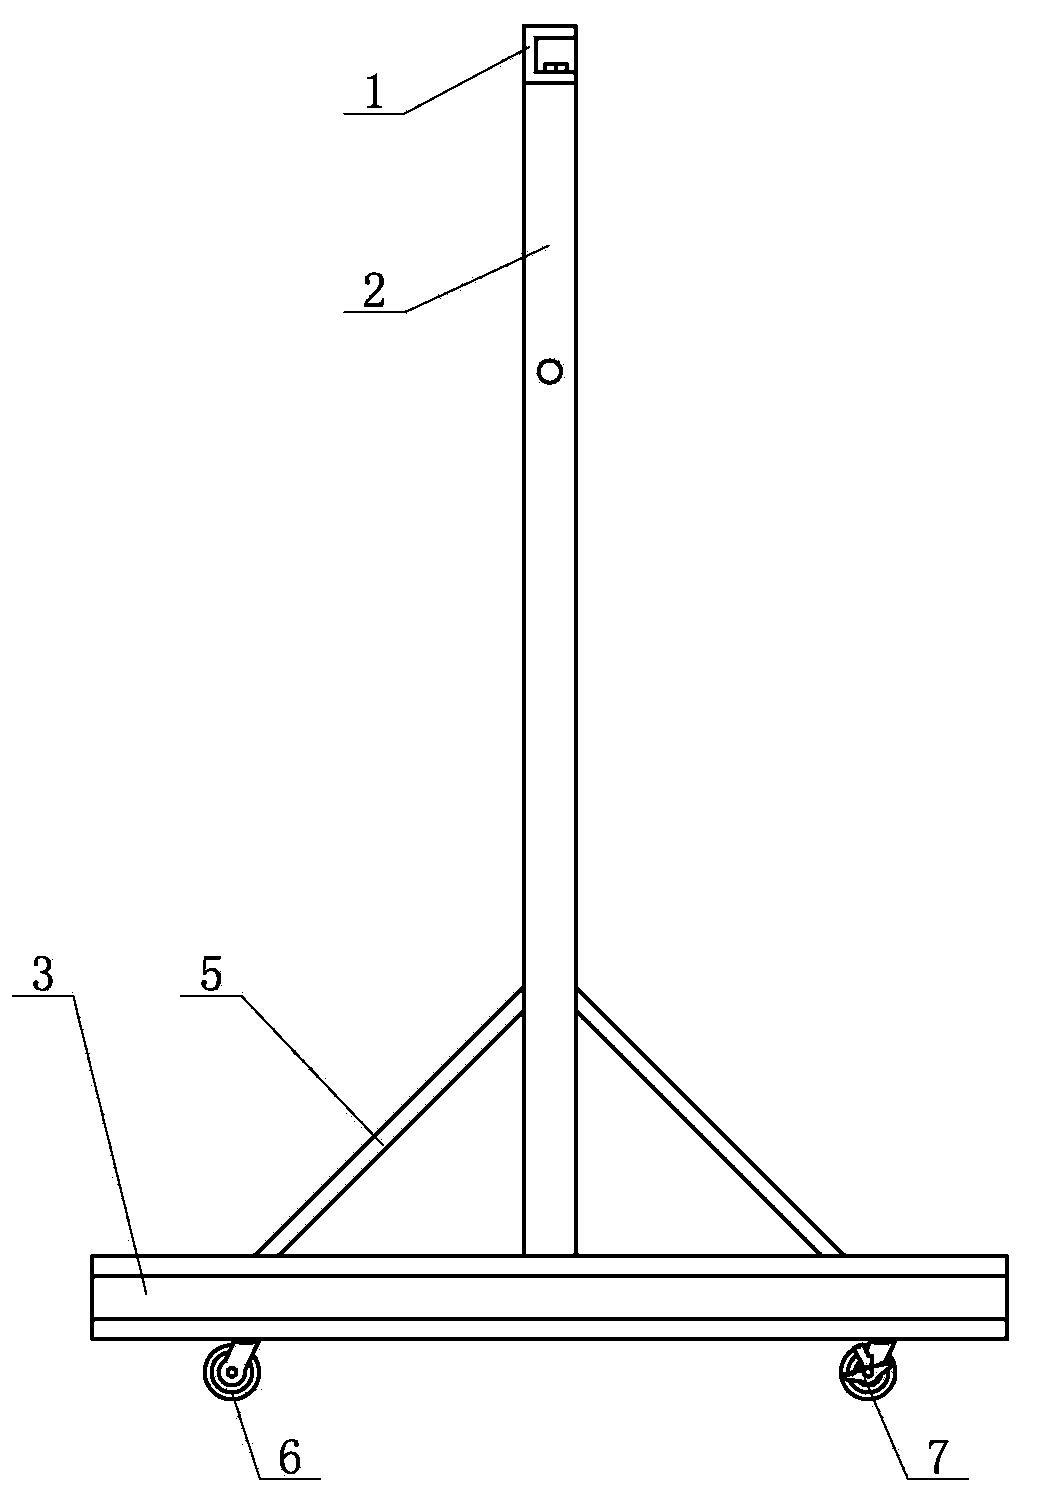 Hoist capable of moving universally